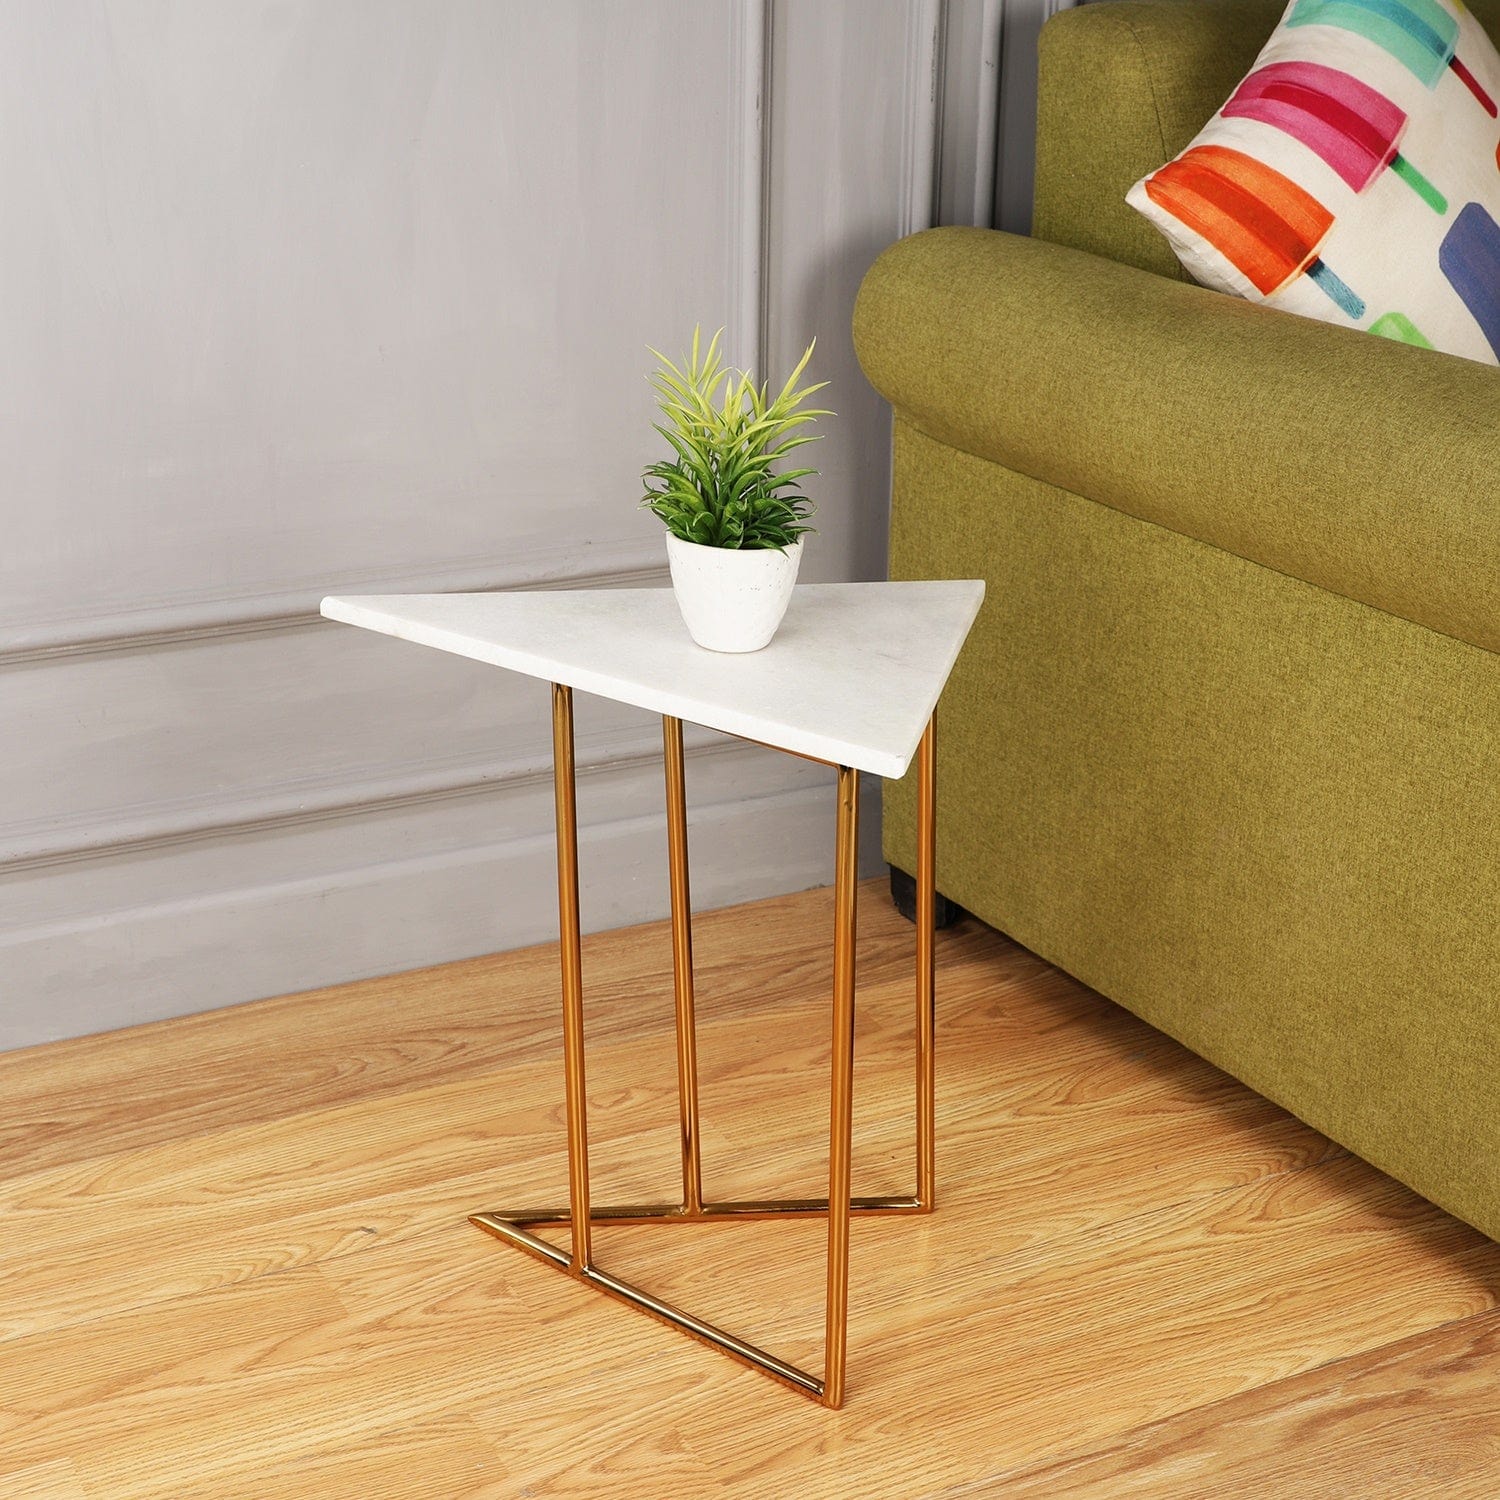 Marbled Steel Triangle Nesting Tables in by Décor de Maison shiny Gold Nickel Finish small size